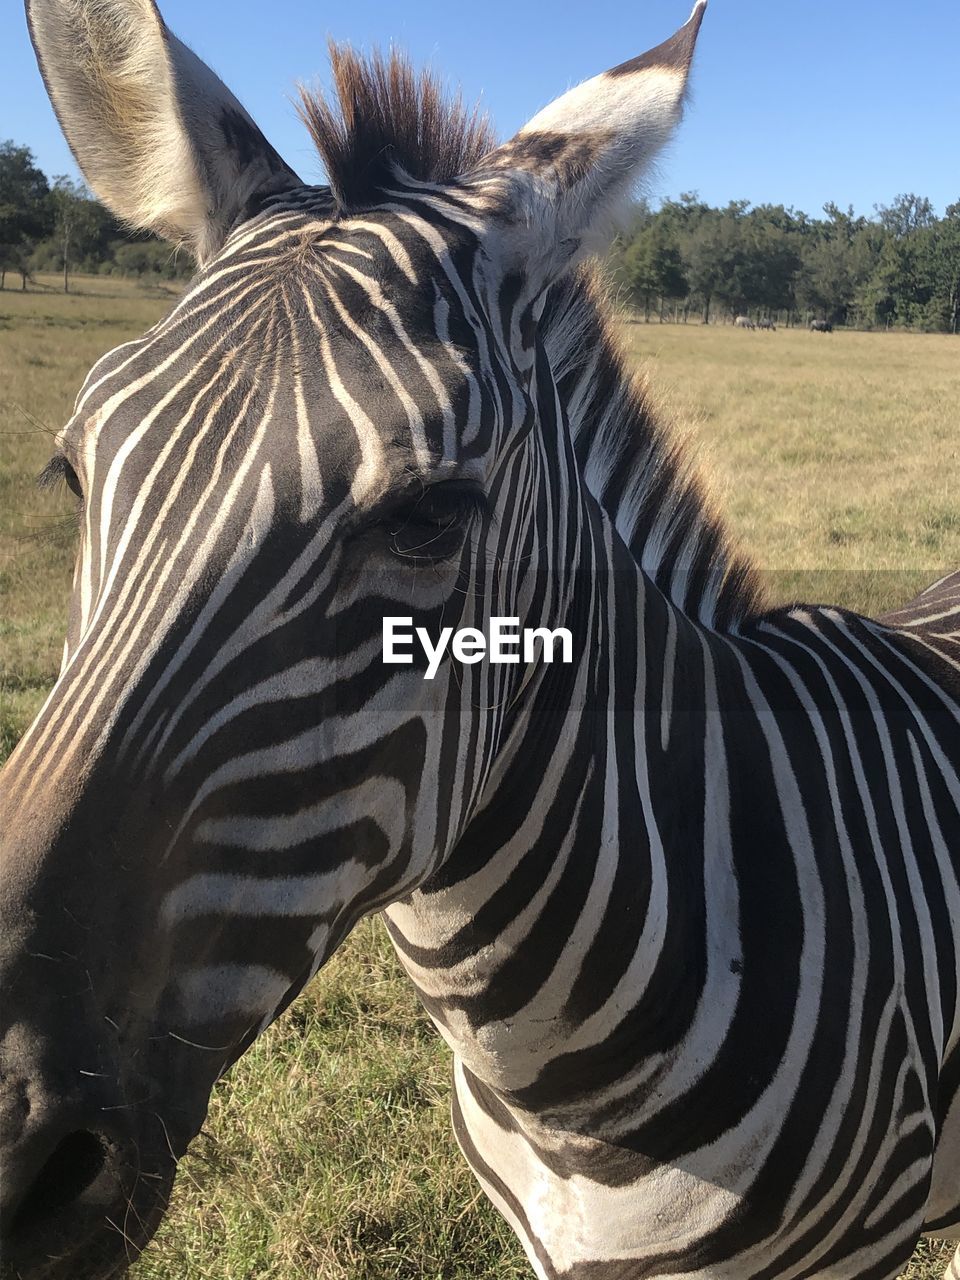 Up close and personal zebra